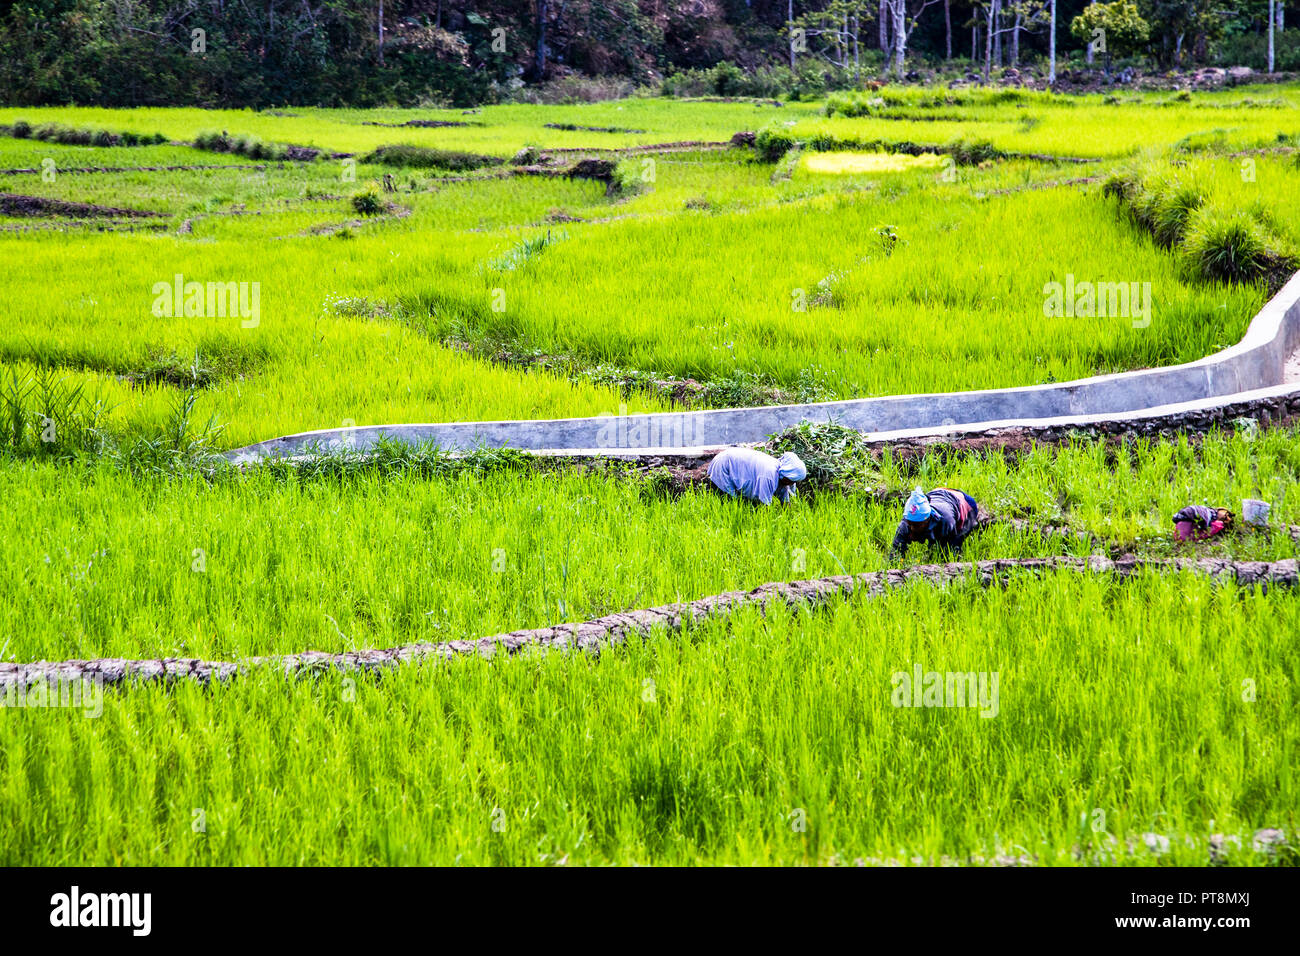 Rice Paddy in Indonesia Stock Photo